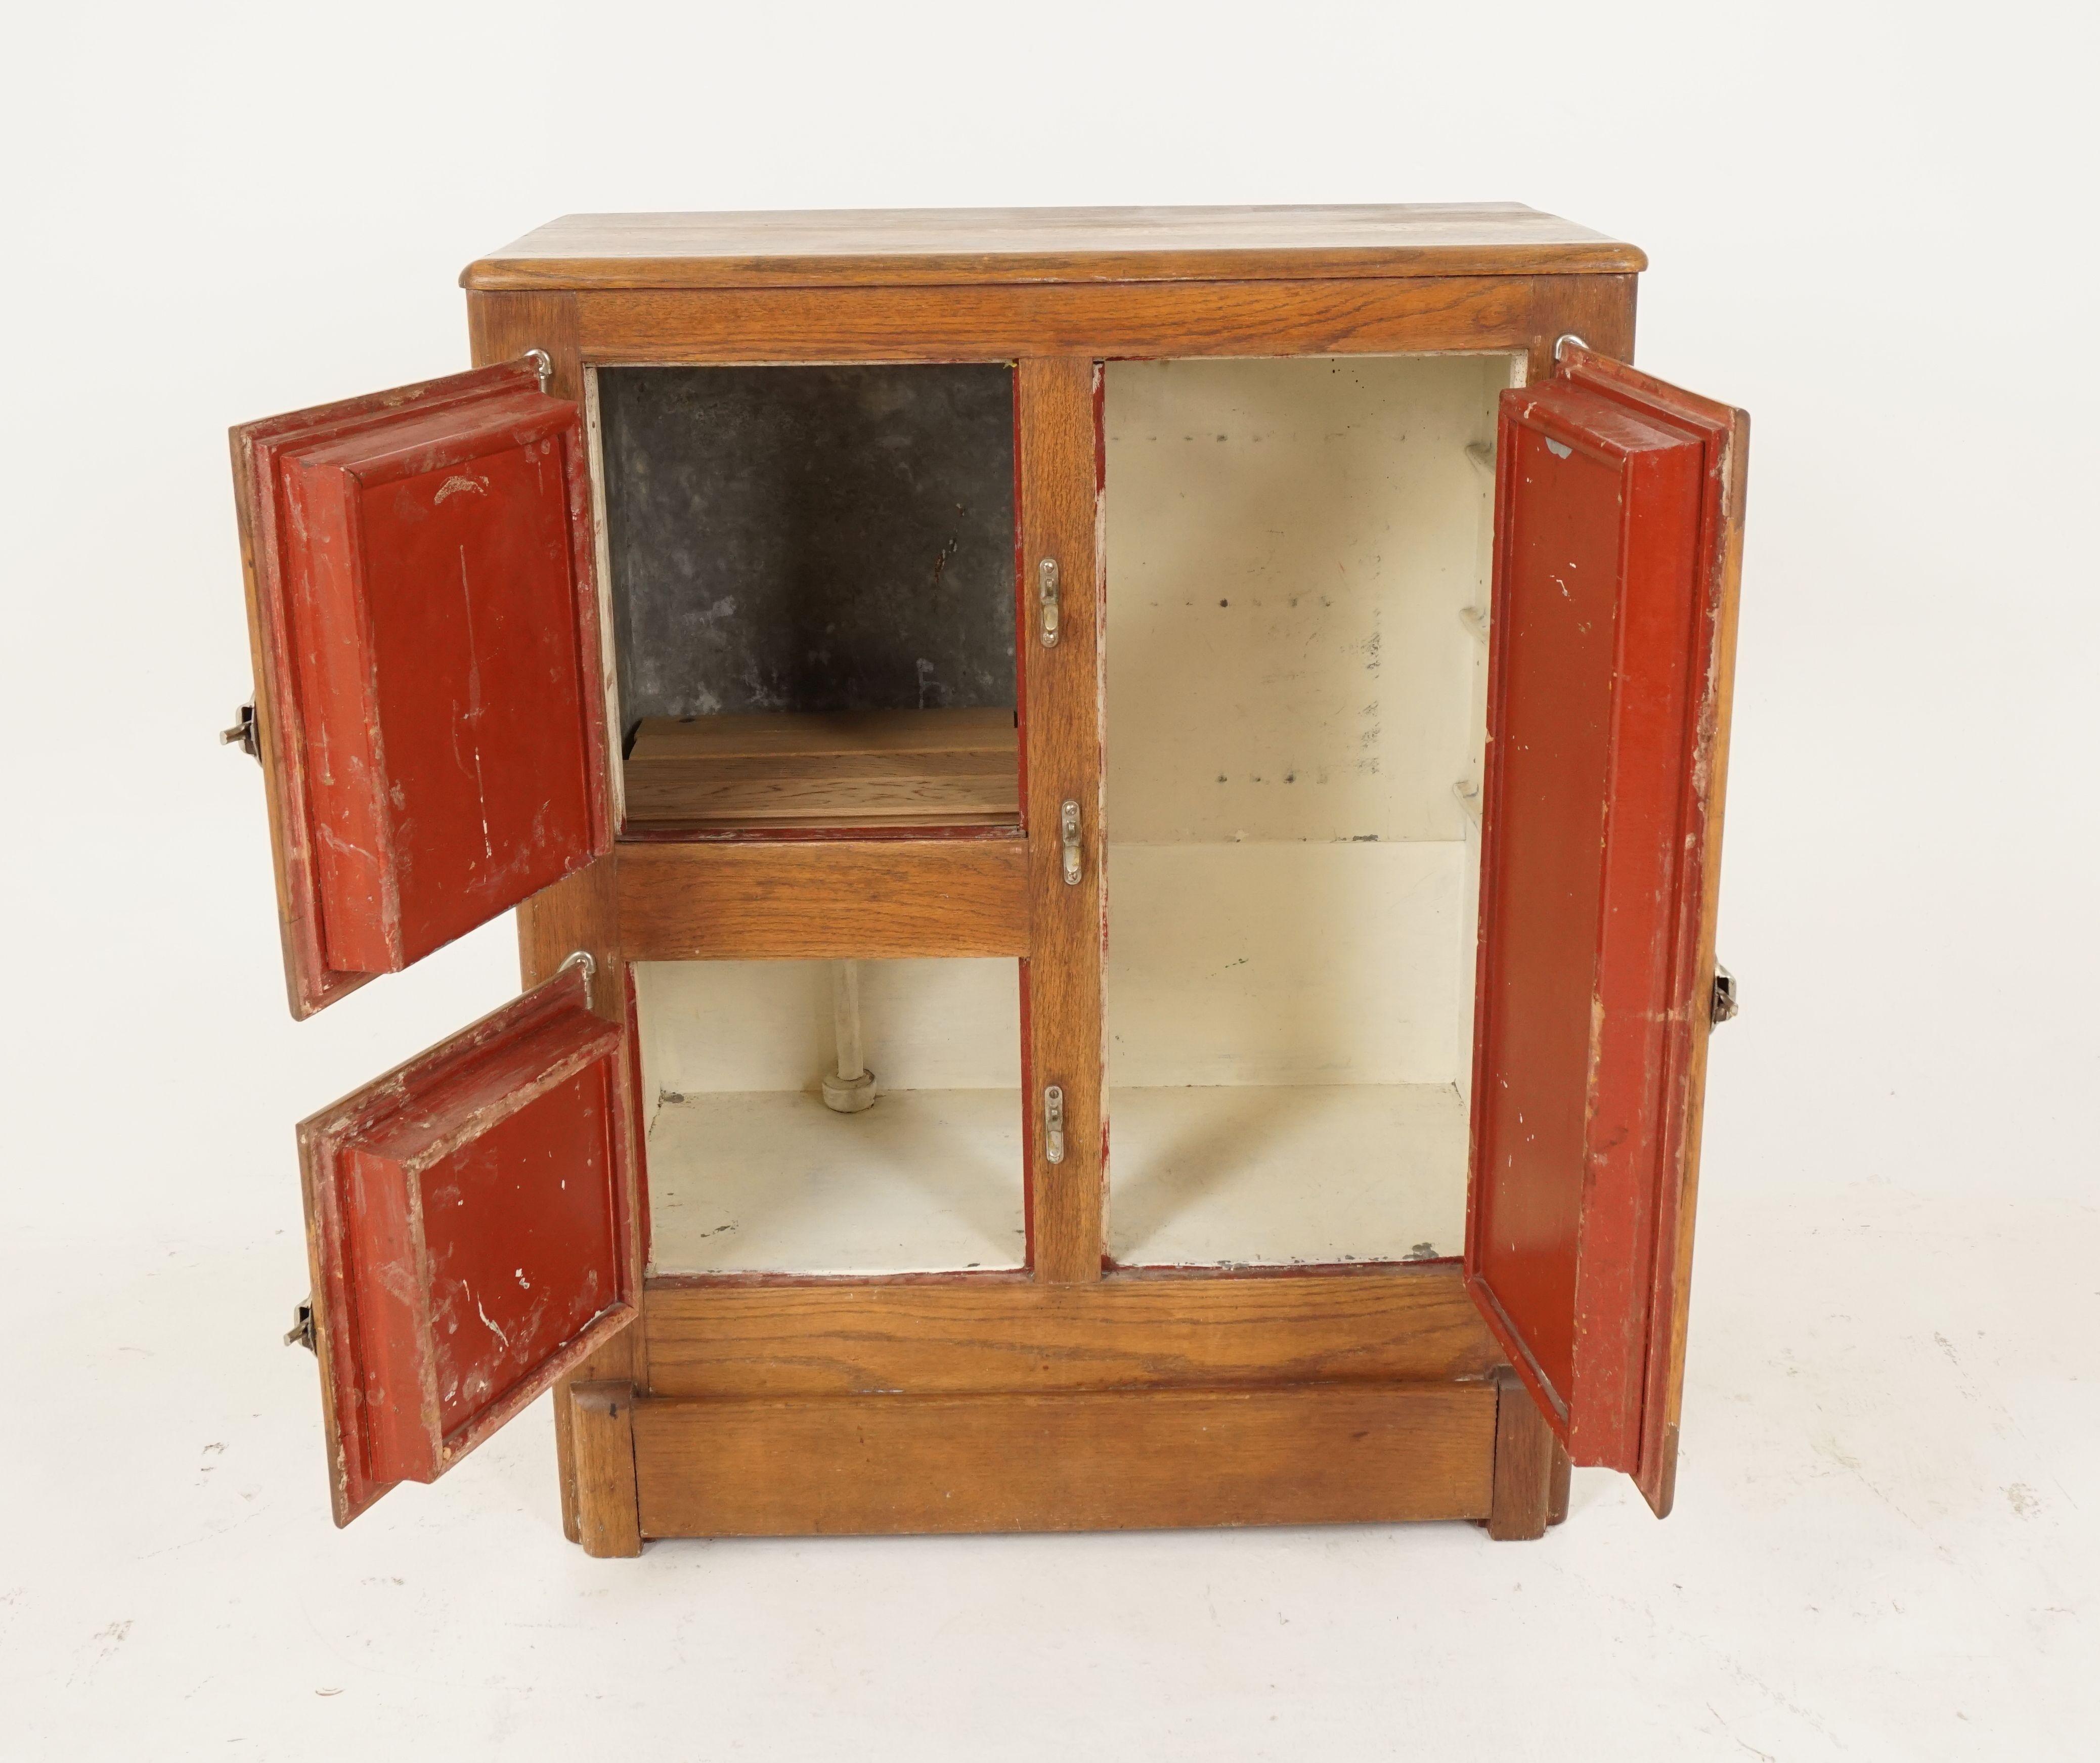 Antique 3 door oak ice box front loader, America 1910, B2557 

America 1910
Solid oak
Moulded top with beveled edge
Tall paneled door on the right opens to reveal tin lined compartment
On the left you have two paneled doors which open to